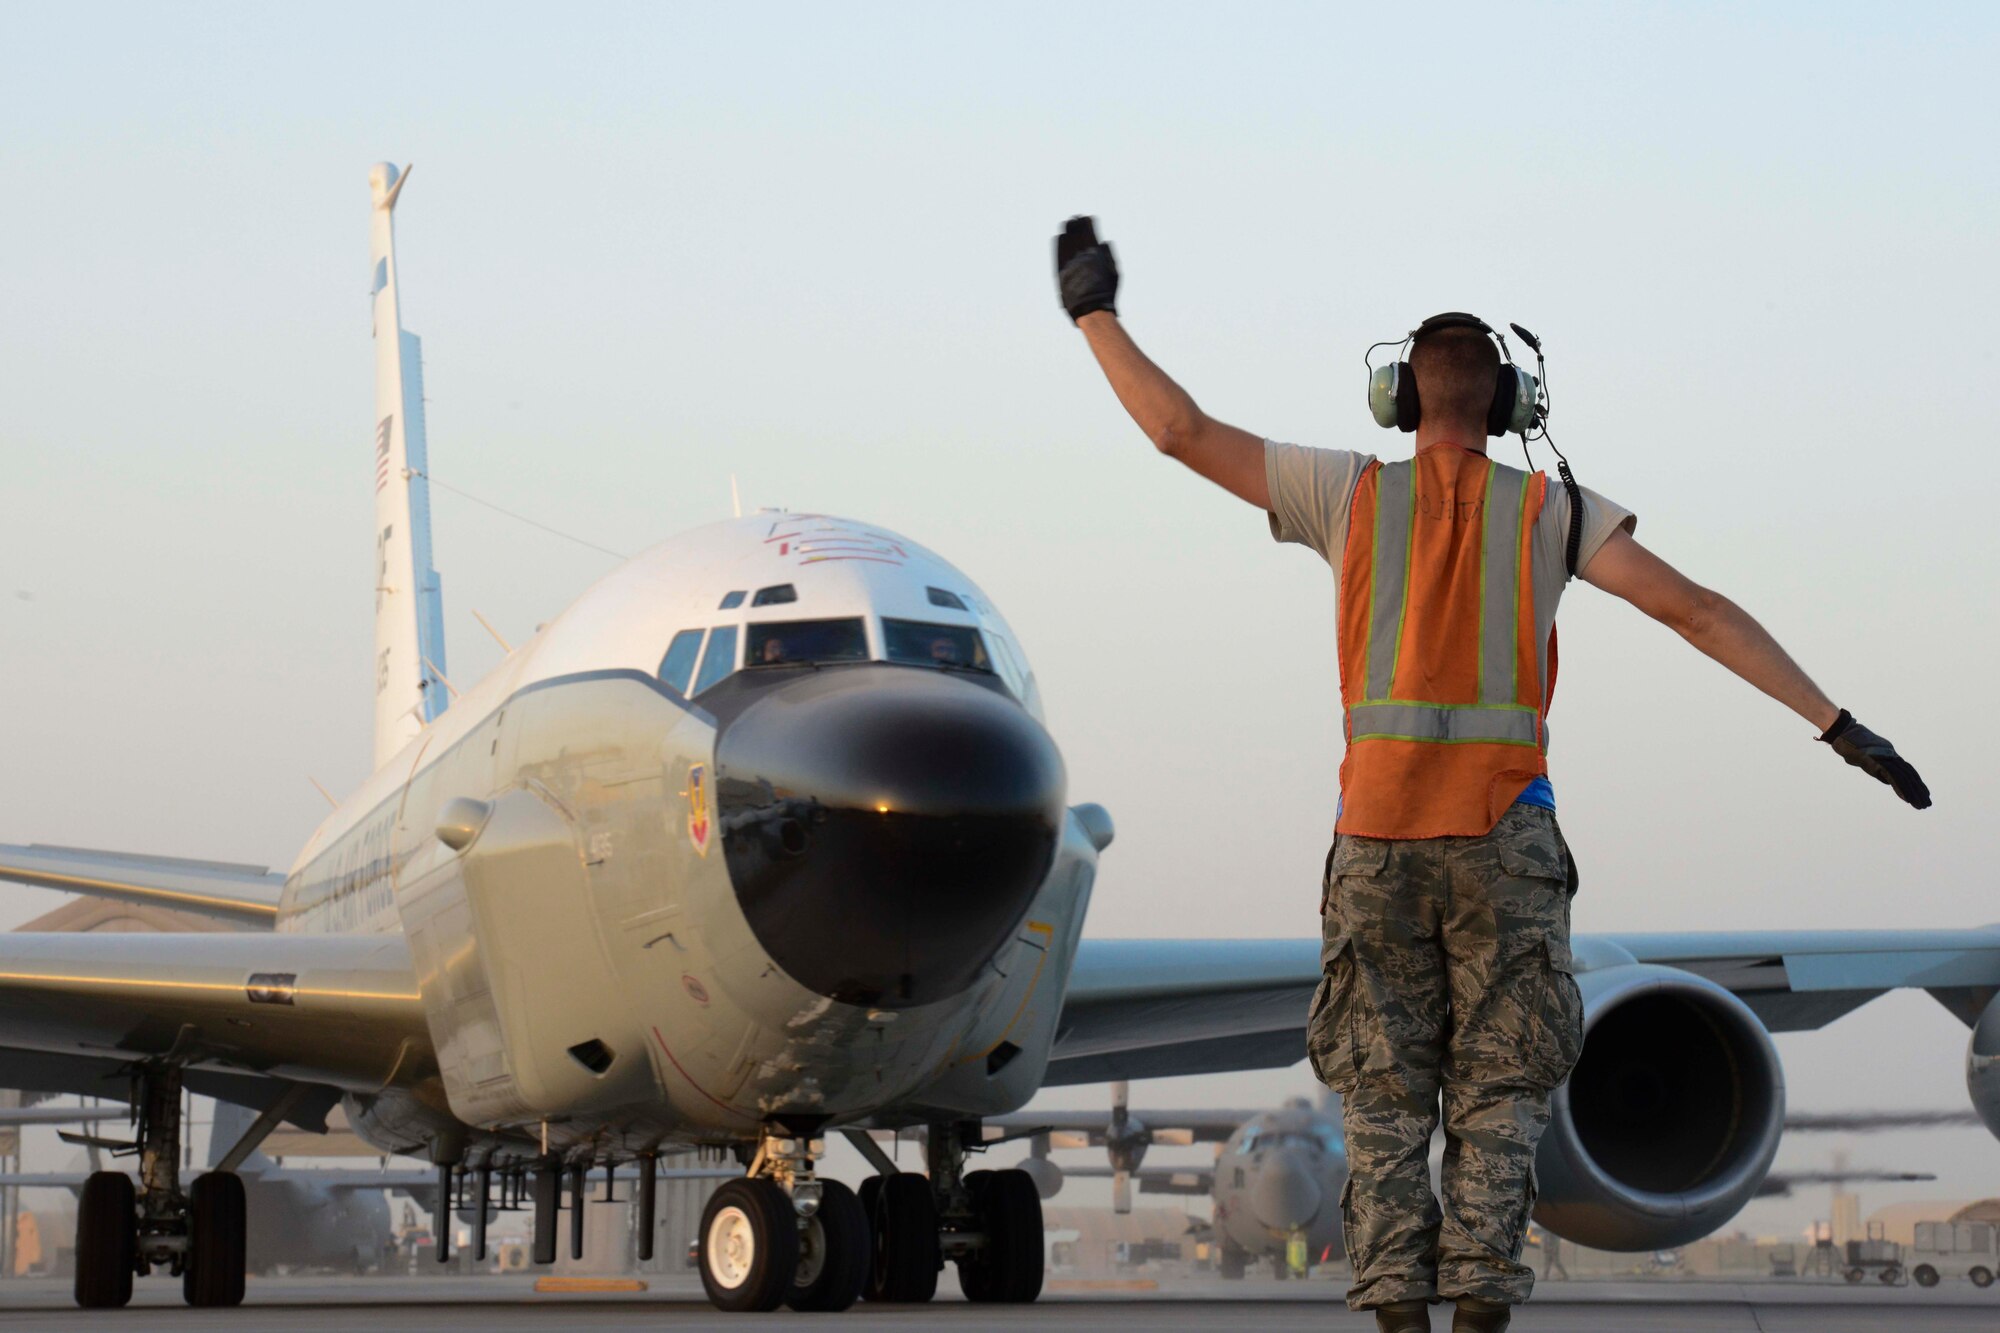 U.S. Air Force Senior Airman Brandon Worra, 763rd Aircraft Maintenance Unit communications navigations specialist, directs a RC-135 Rivet Joint for taxiing for takeoff at Al Udeid Air Base, Qatar, July 11, 2014. The RC-135 Rivet Joint is a reconnaissance aircraft, and supports theater and national level consumers with near real-time on-scene intelligence collection, analysis and dissemination capabilities. Worra is deployed from Offut Air Force Base, Nebraska and hails from Muskegon, Michigan. (U.S. Air Force photo by Staff Sgt. Ciara Wymbs) 